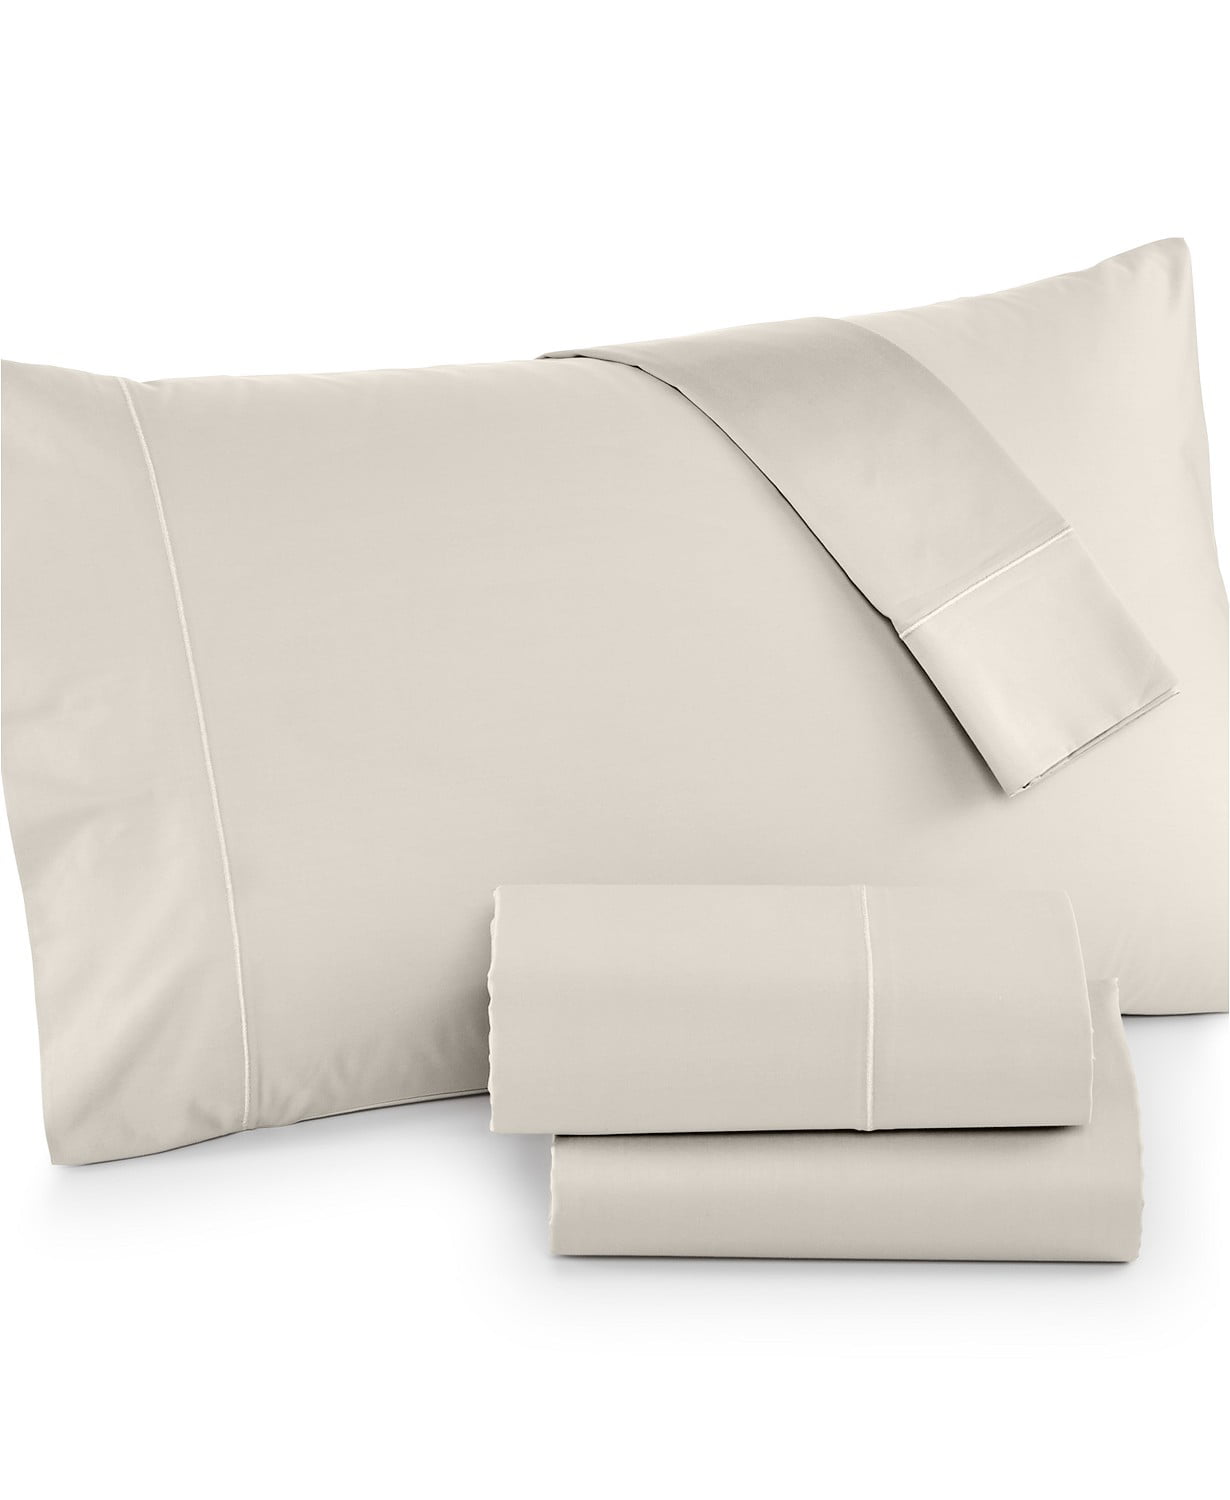 Hotel Collection 525 Thread Count Cotton Extra Deep Pocket Twin Sheet Set With Fitted Sheet